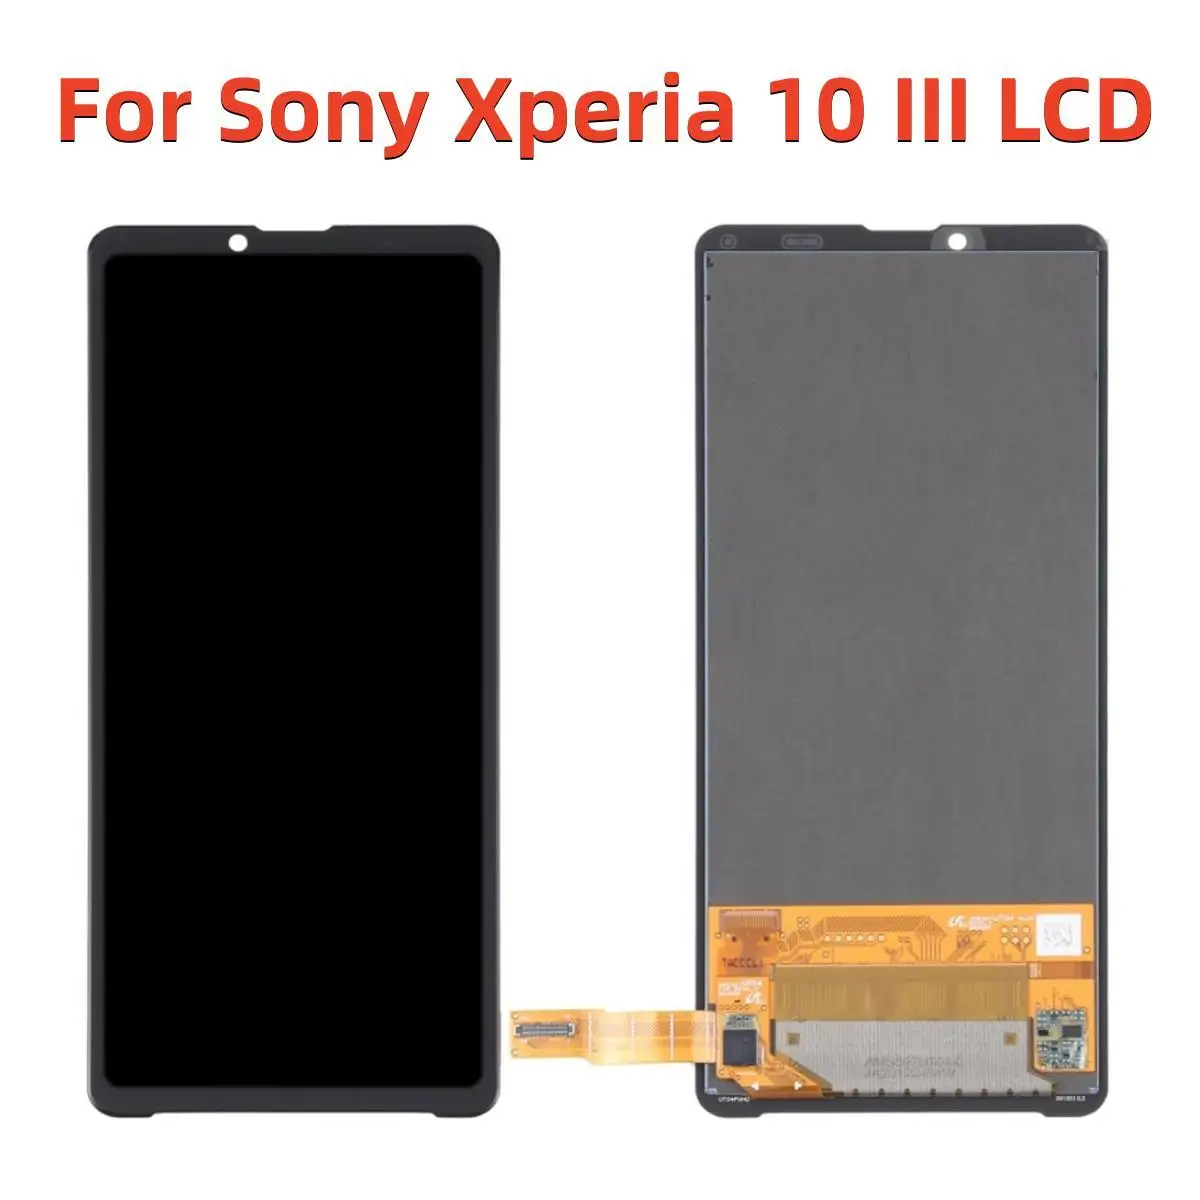 Original Display For Sony Xperia 10 III LCD Touch Screen Replacement Parts SO-52B SOG04 XQ-BT52 A102SO Digitizer Assembly